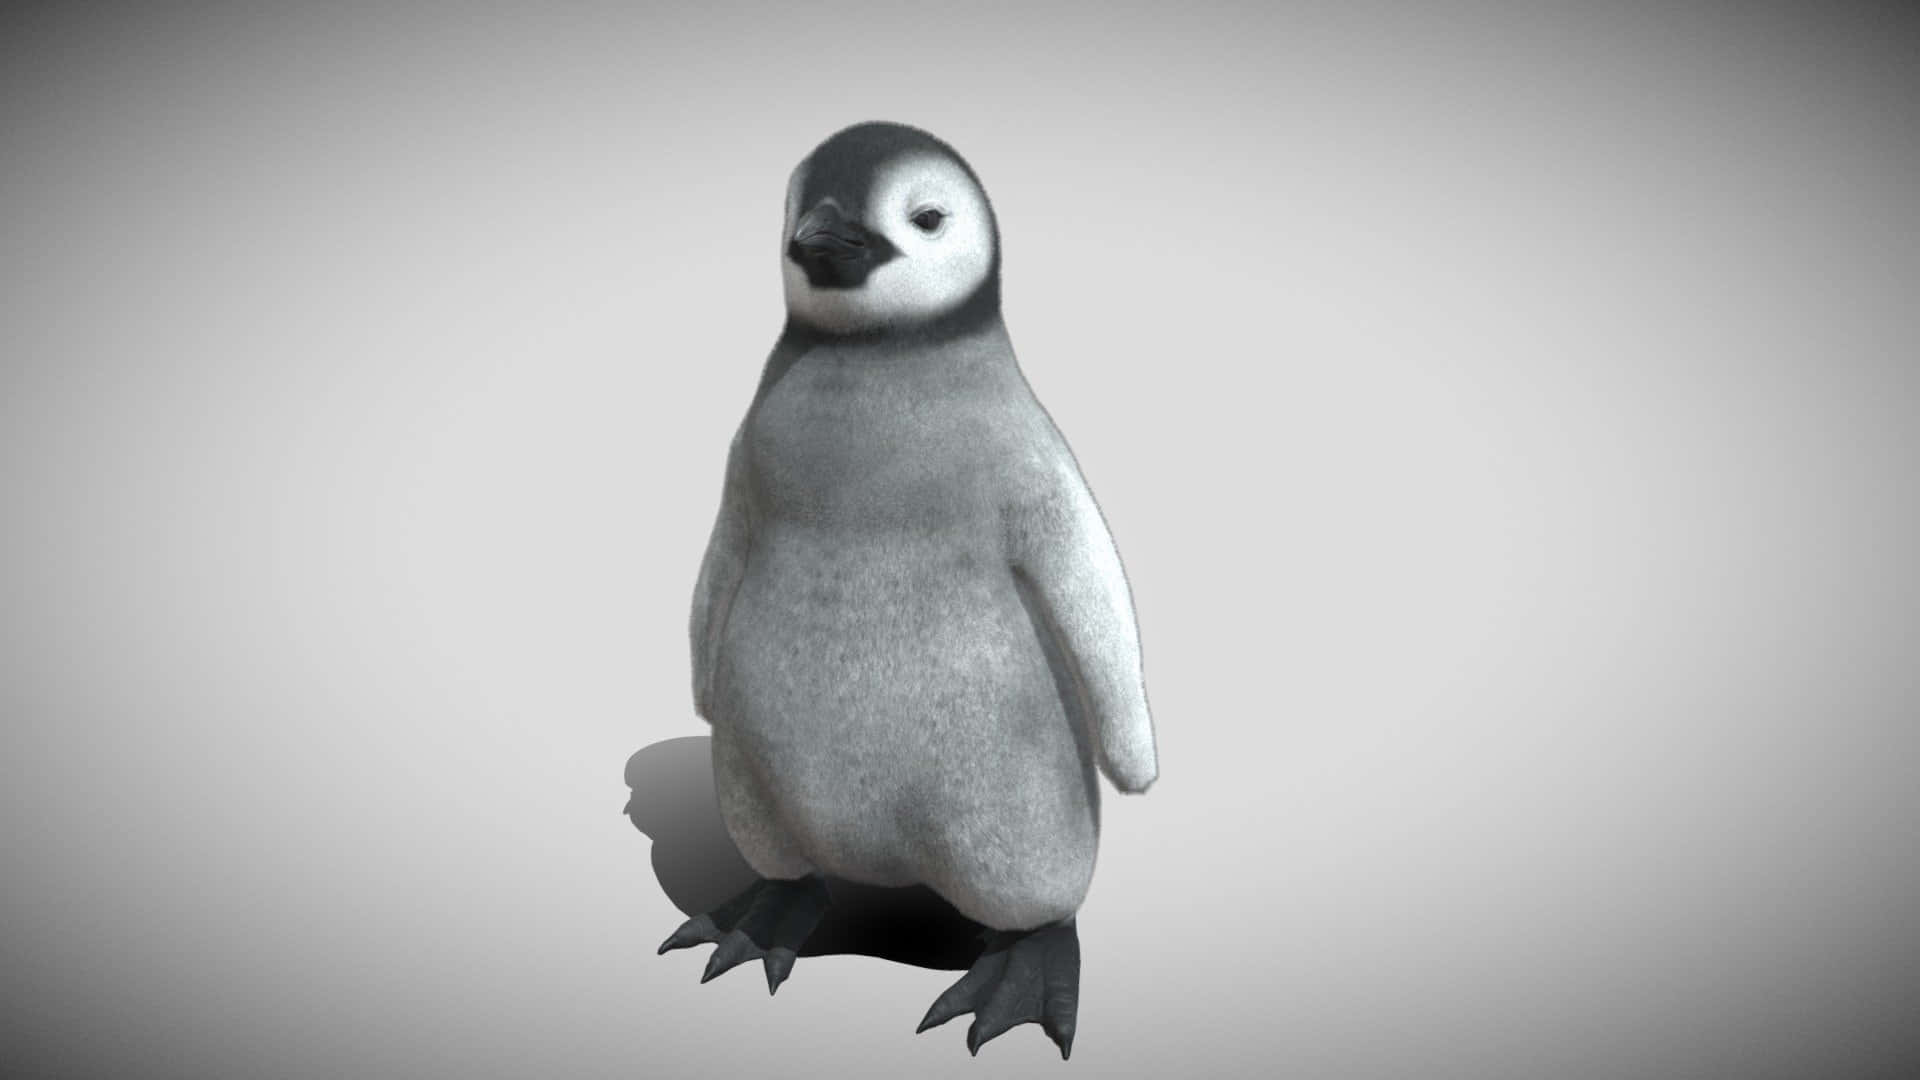 This adorable baby penguin will make you smile!